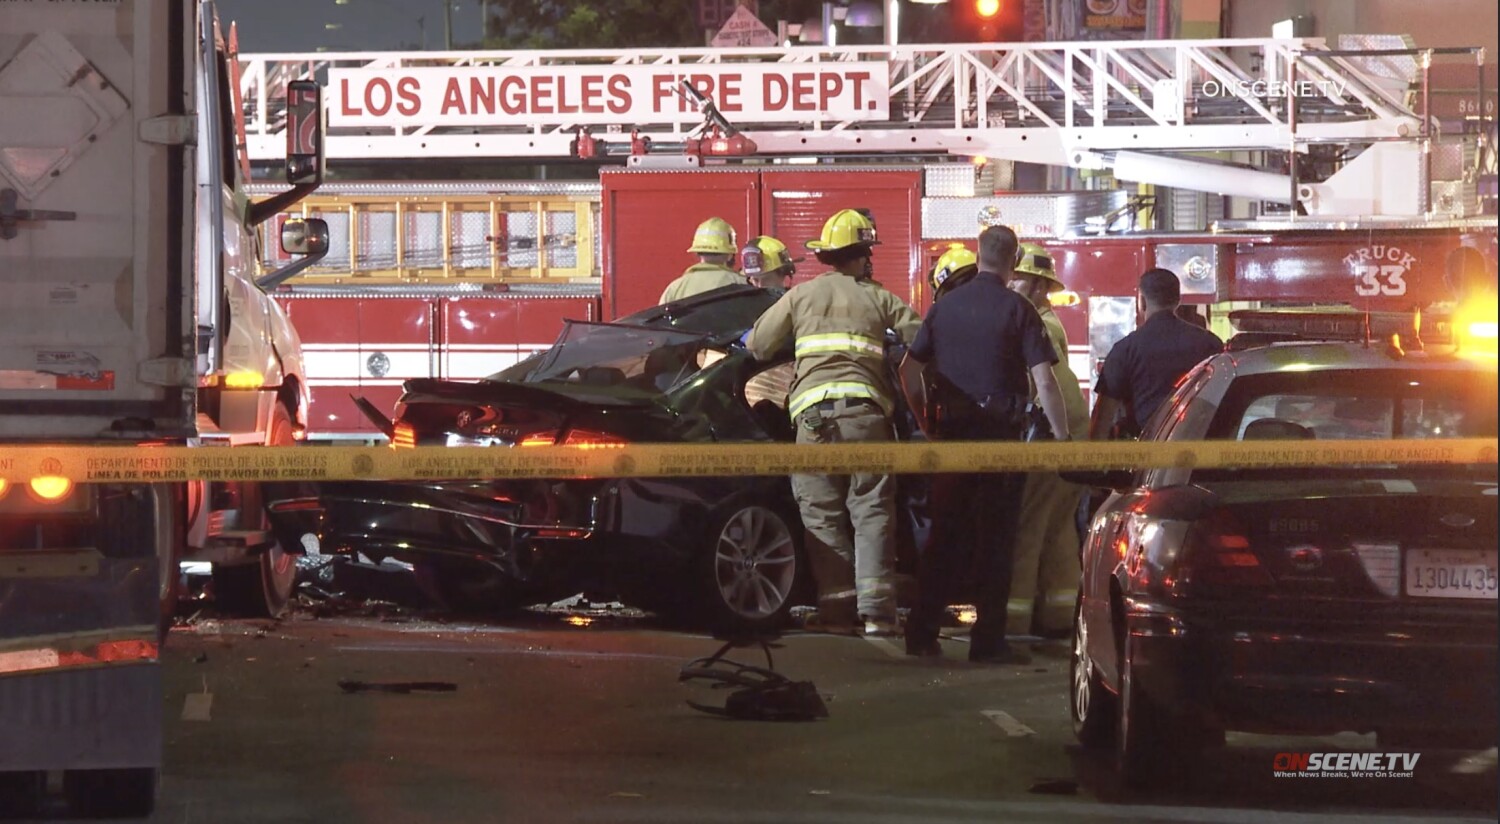 Officers were chasing motorist at time of deadly crash, LAPD report says